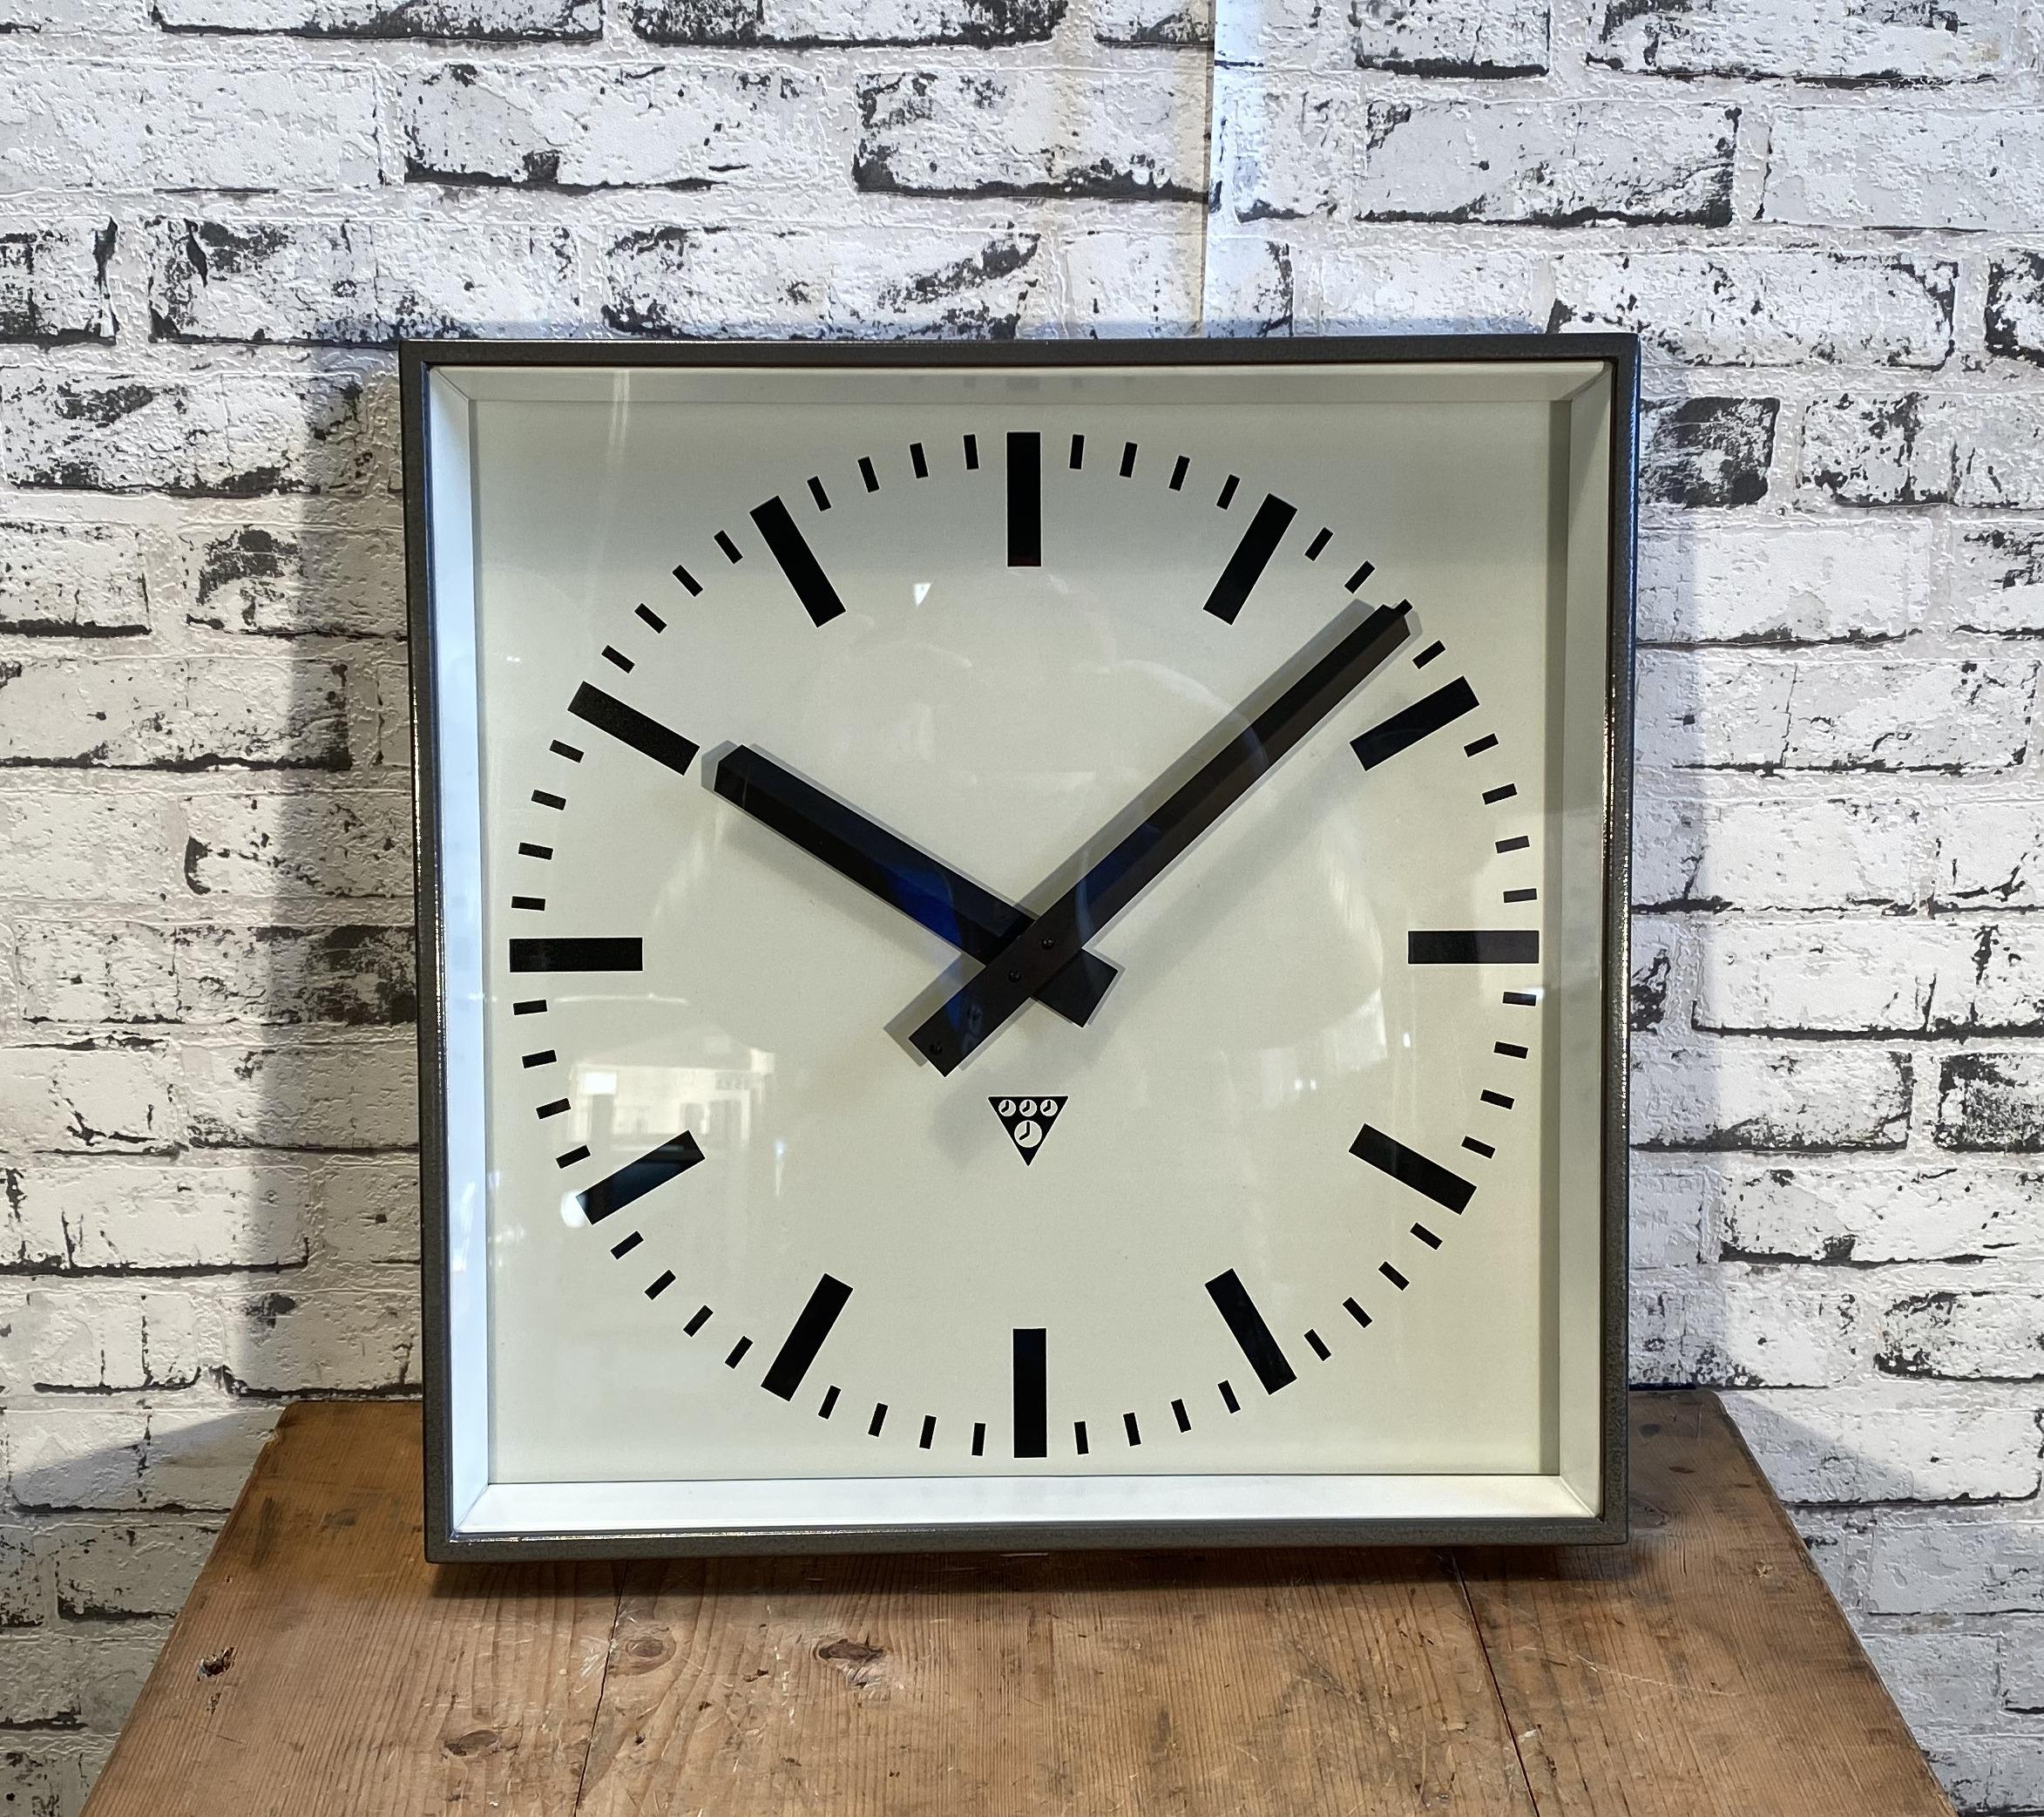 - Clock made by Pragotron in former Czechoslovakia in the 1960s
- Was used in factories, schools & railway stations
- Features a gray hammer finish metal body, aluminium dial, clear glass
- Has been converted into a battery-powered clockwork
-